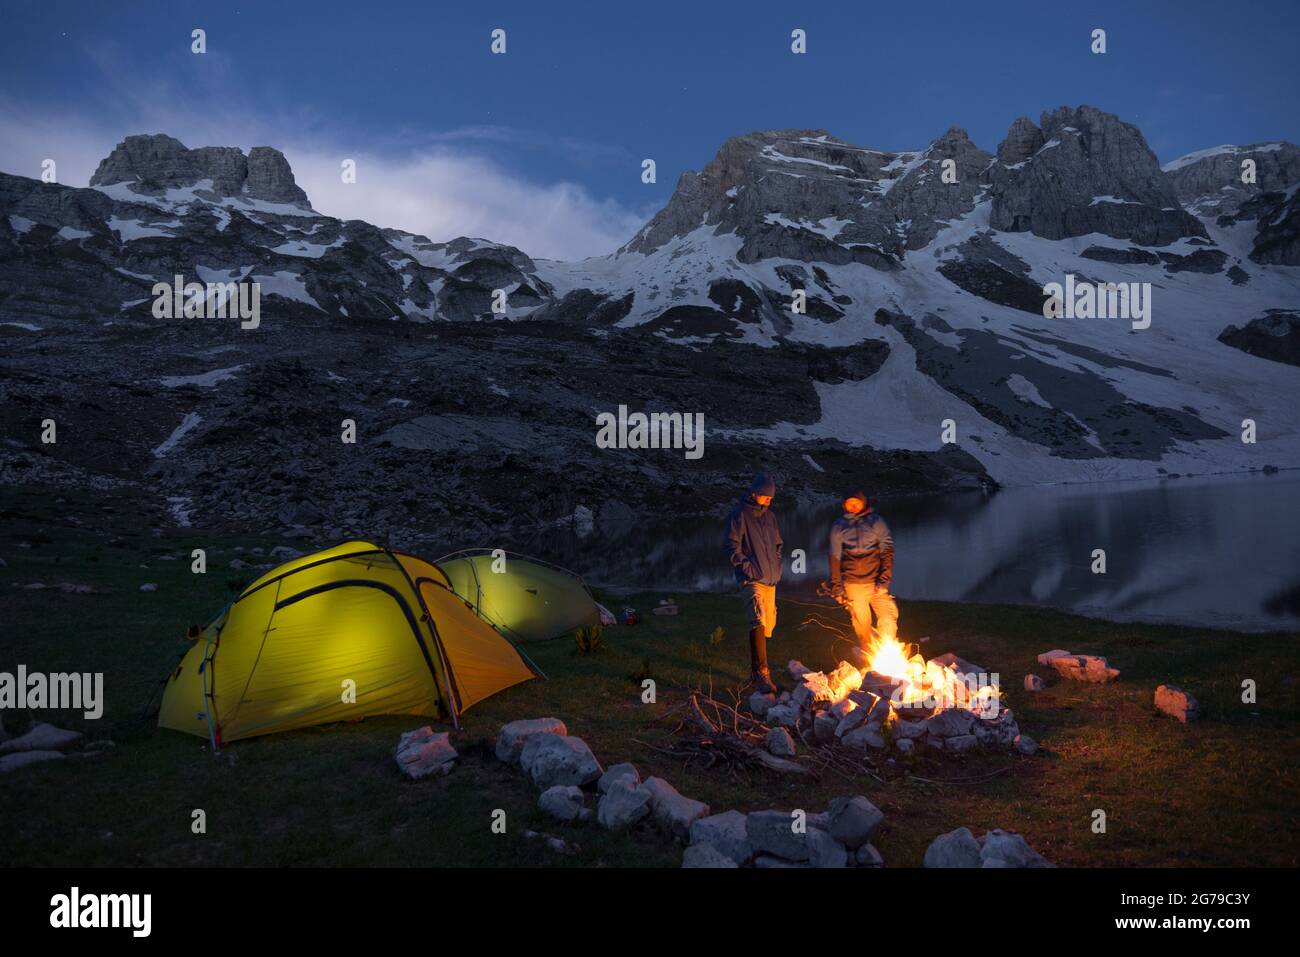 Two hikers stand by a campfire next to their lighted tents in the Prokletije National Park near a mountain lake, Albania Stock Photo